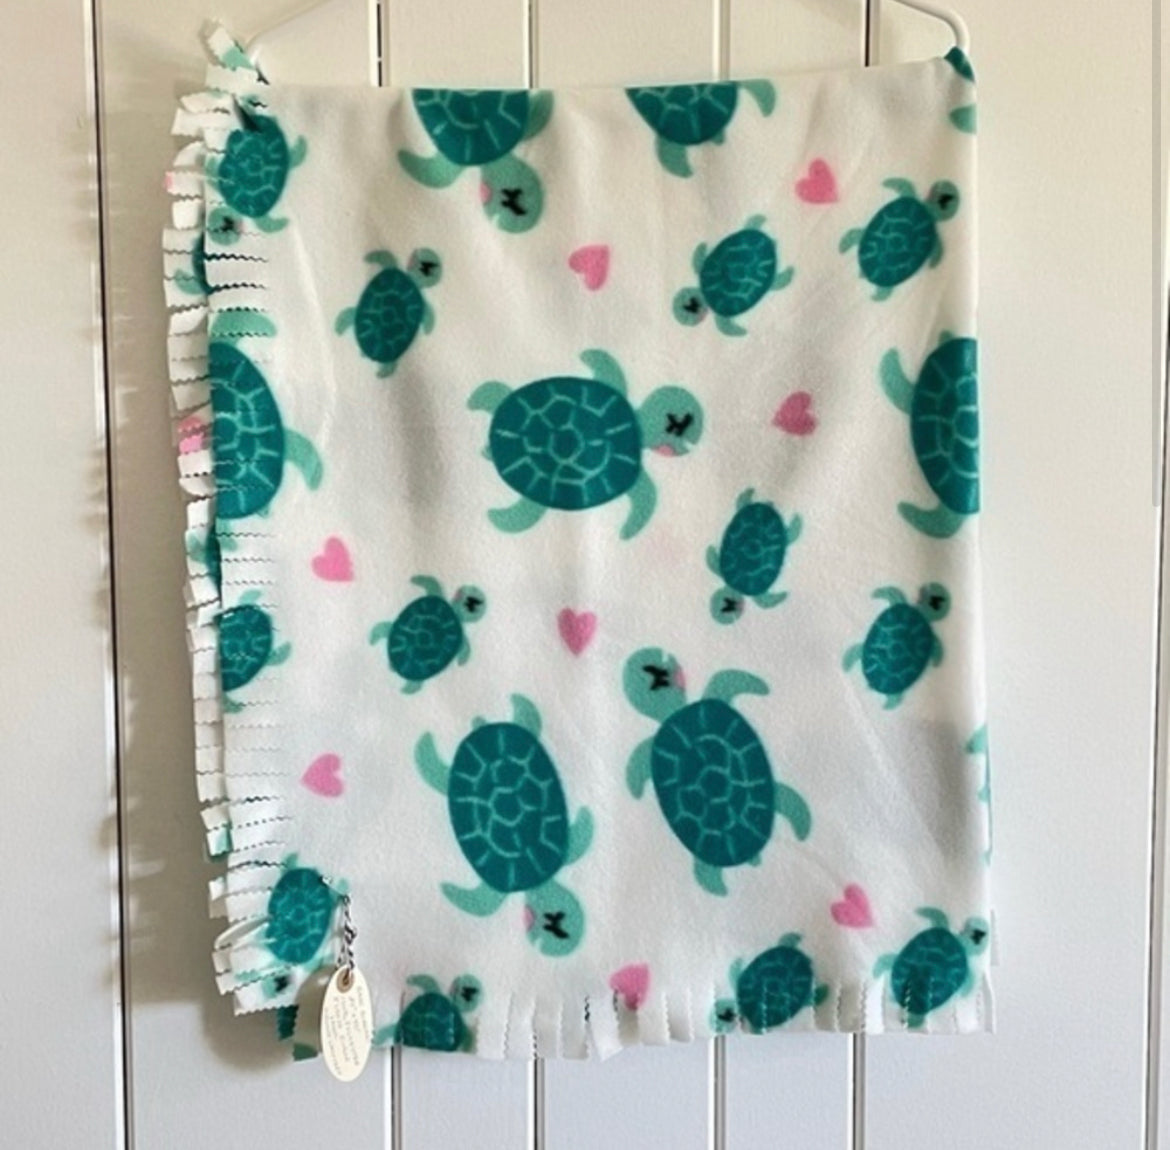 Hand Crafted Turtle Green White Fleece Baby Blanket NWT 34” x 40” Wide Fringe Kids Toddler Child Bedding Single Layer